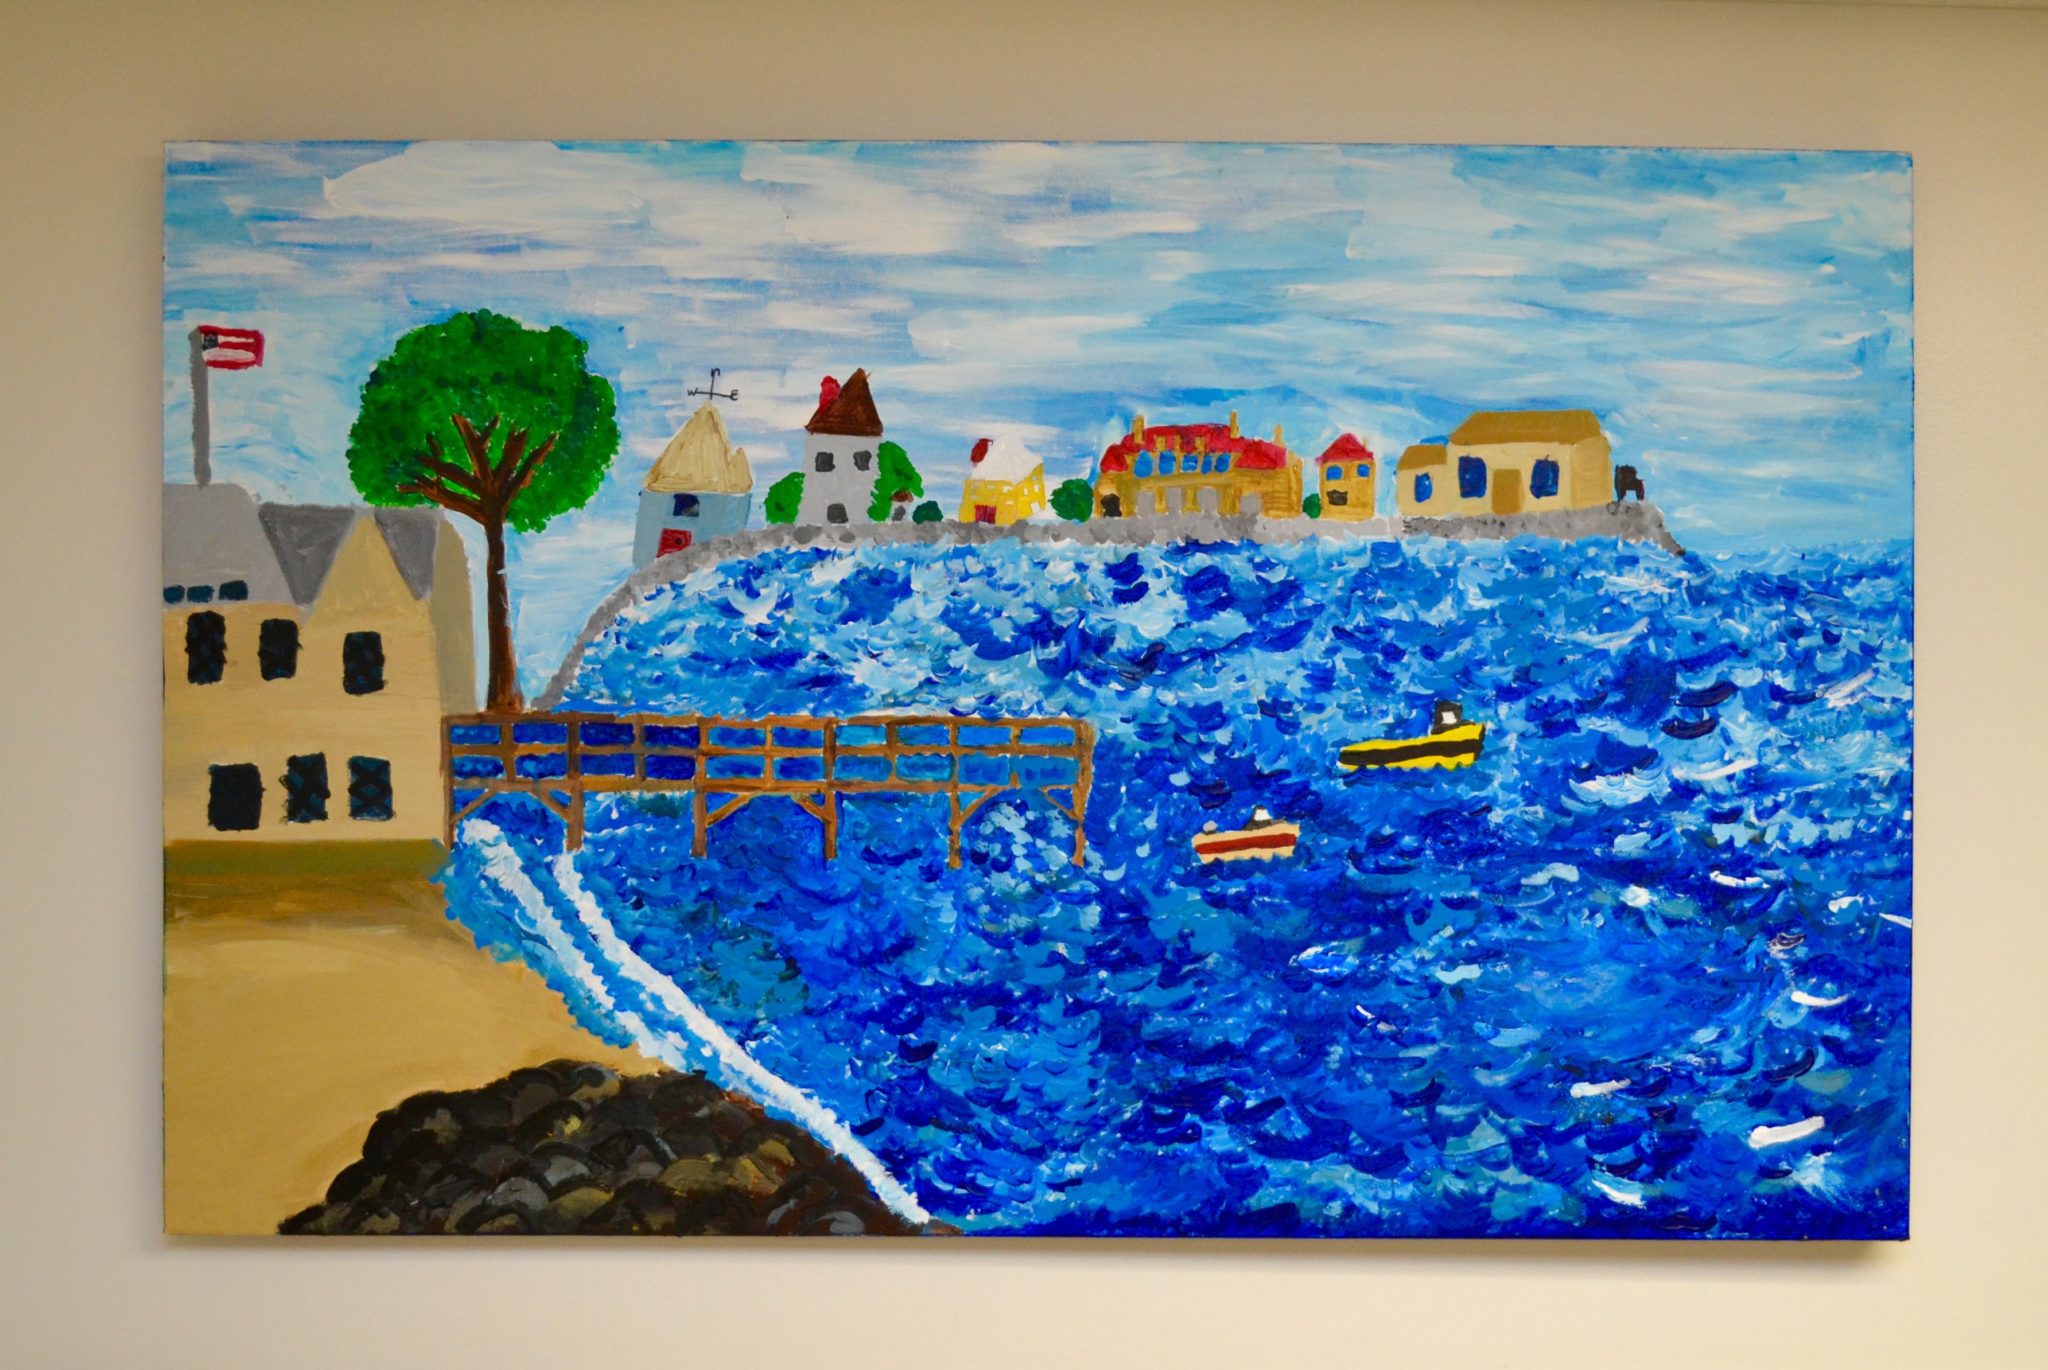 Stanley artwork of the ocean with boats and houses